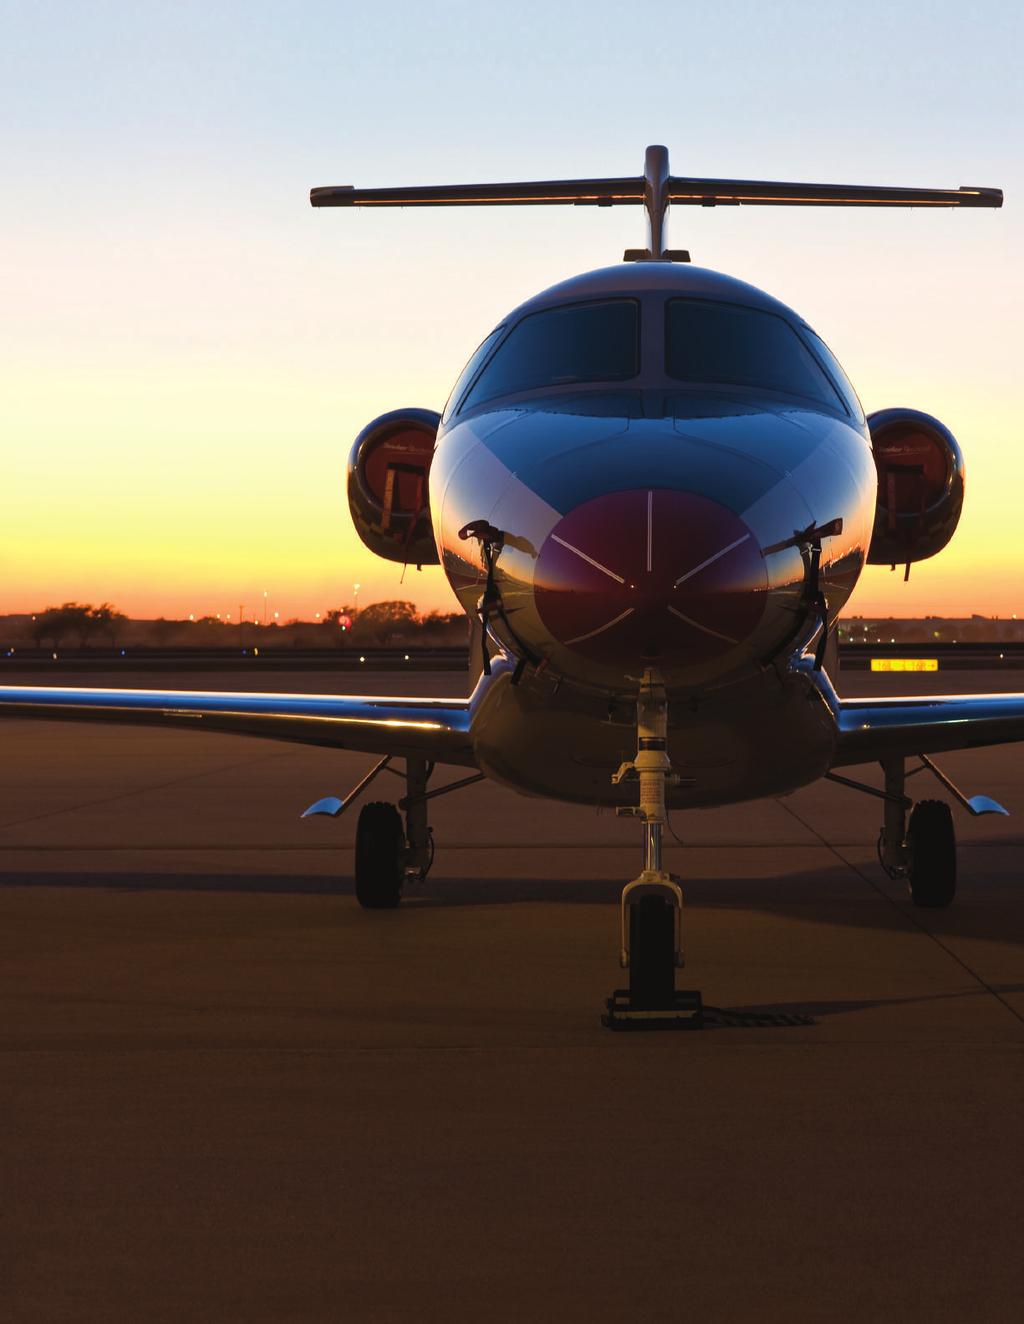 SERVICES Whatever your needs, we make aviation easy. The operations specialists at Fort Worth Alliance Airport deliver exceptional service, regardless of your aviation requirements.